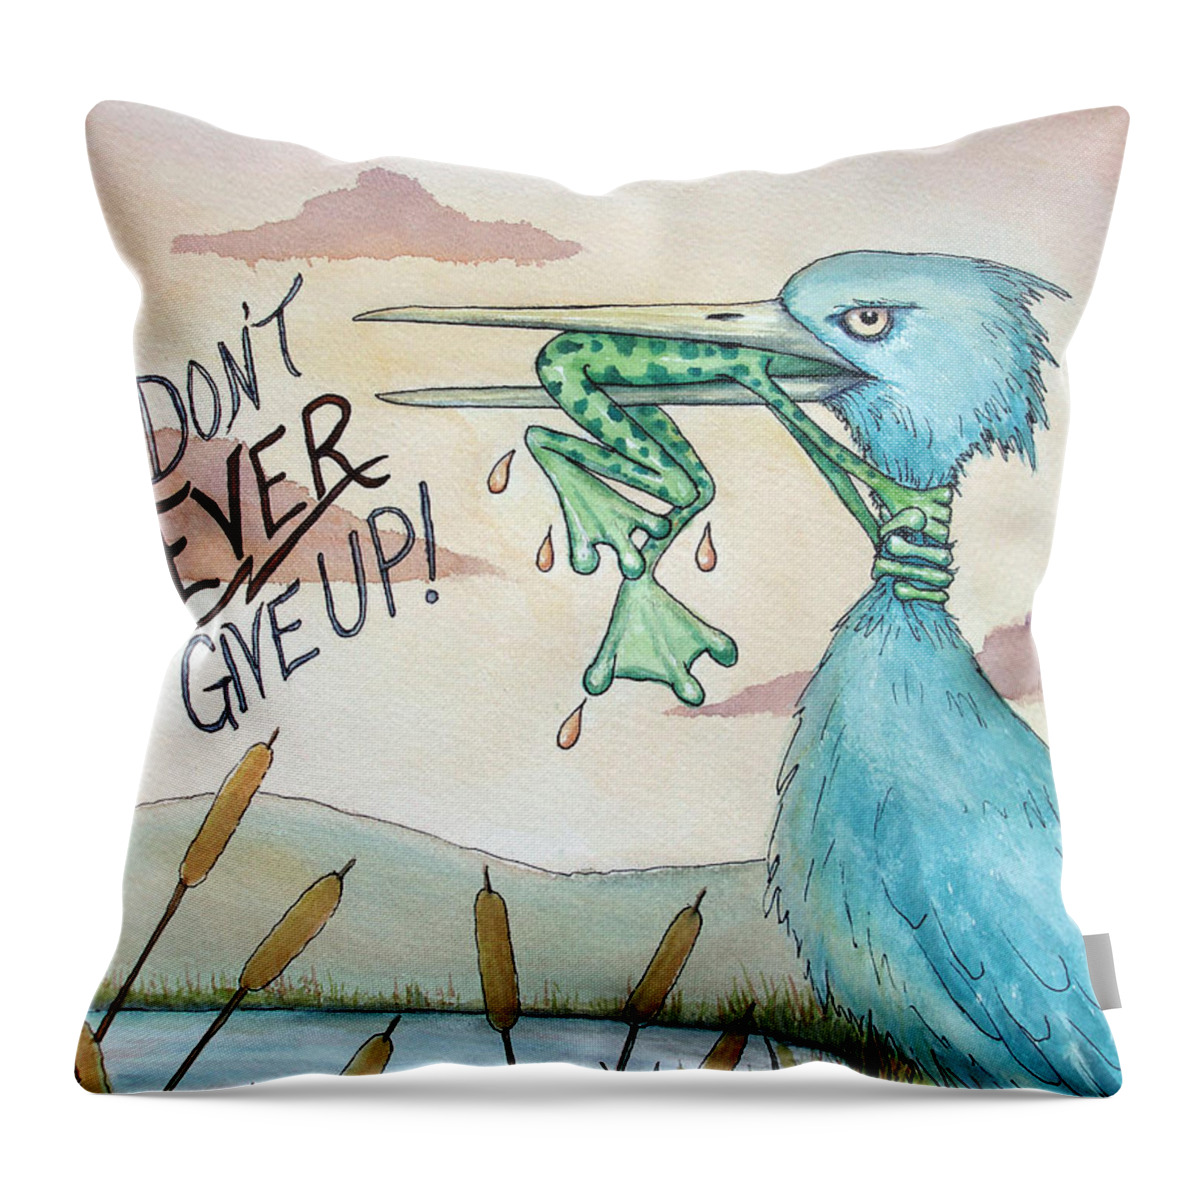 Dont Ever Give Up Throw Pillow featuring the painting Do Not Ever Give Up by Joey Nash